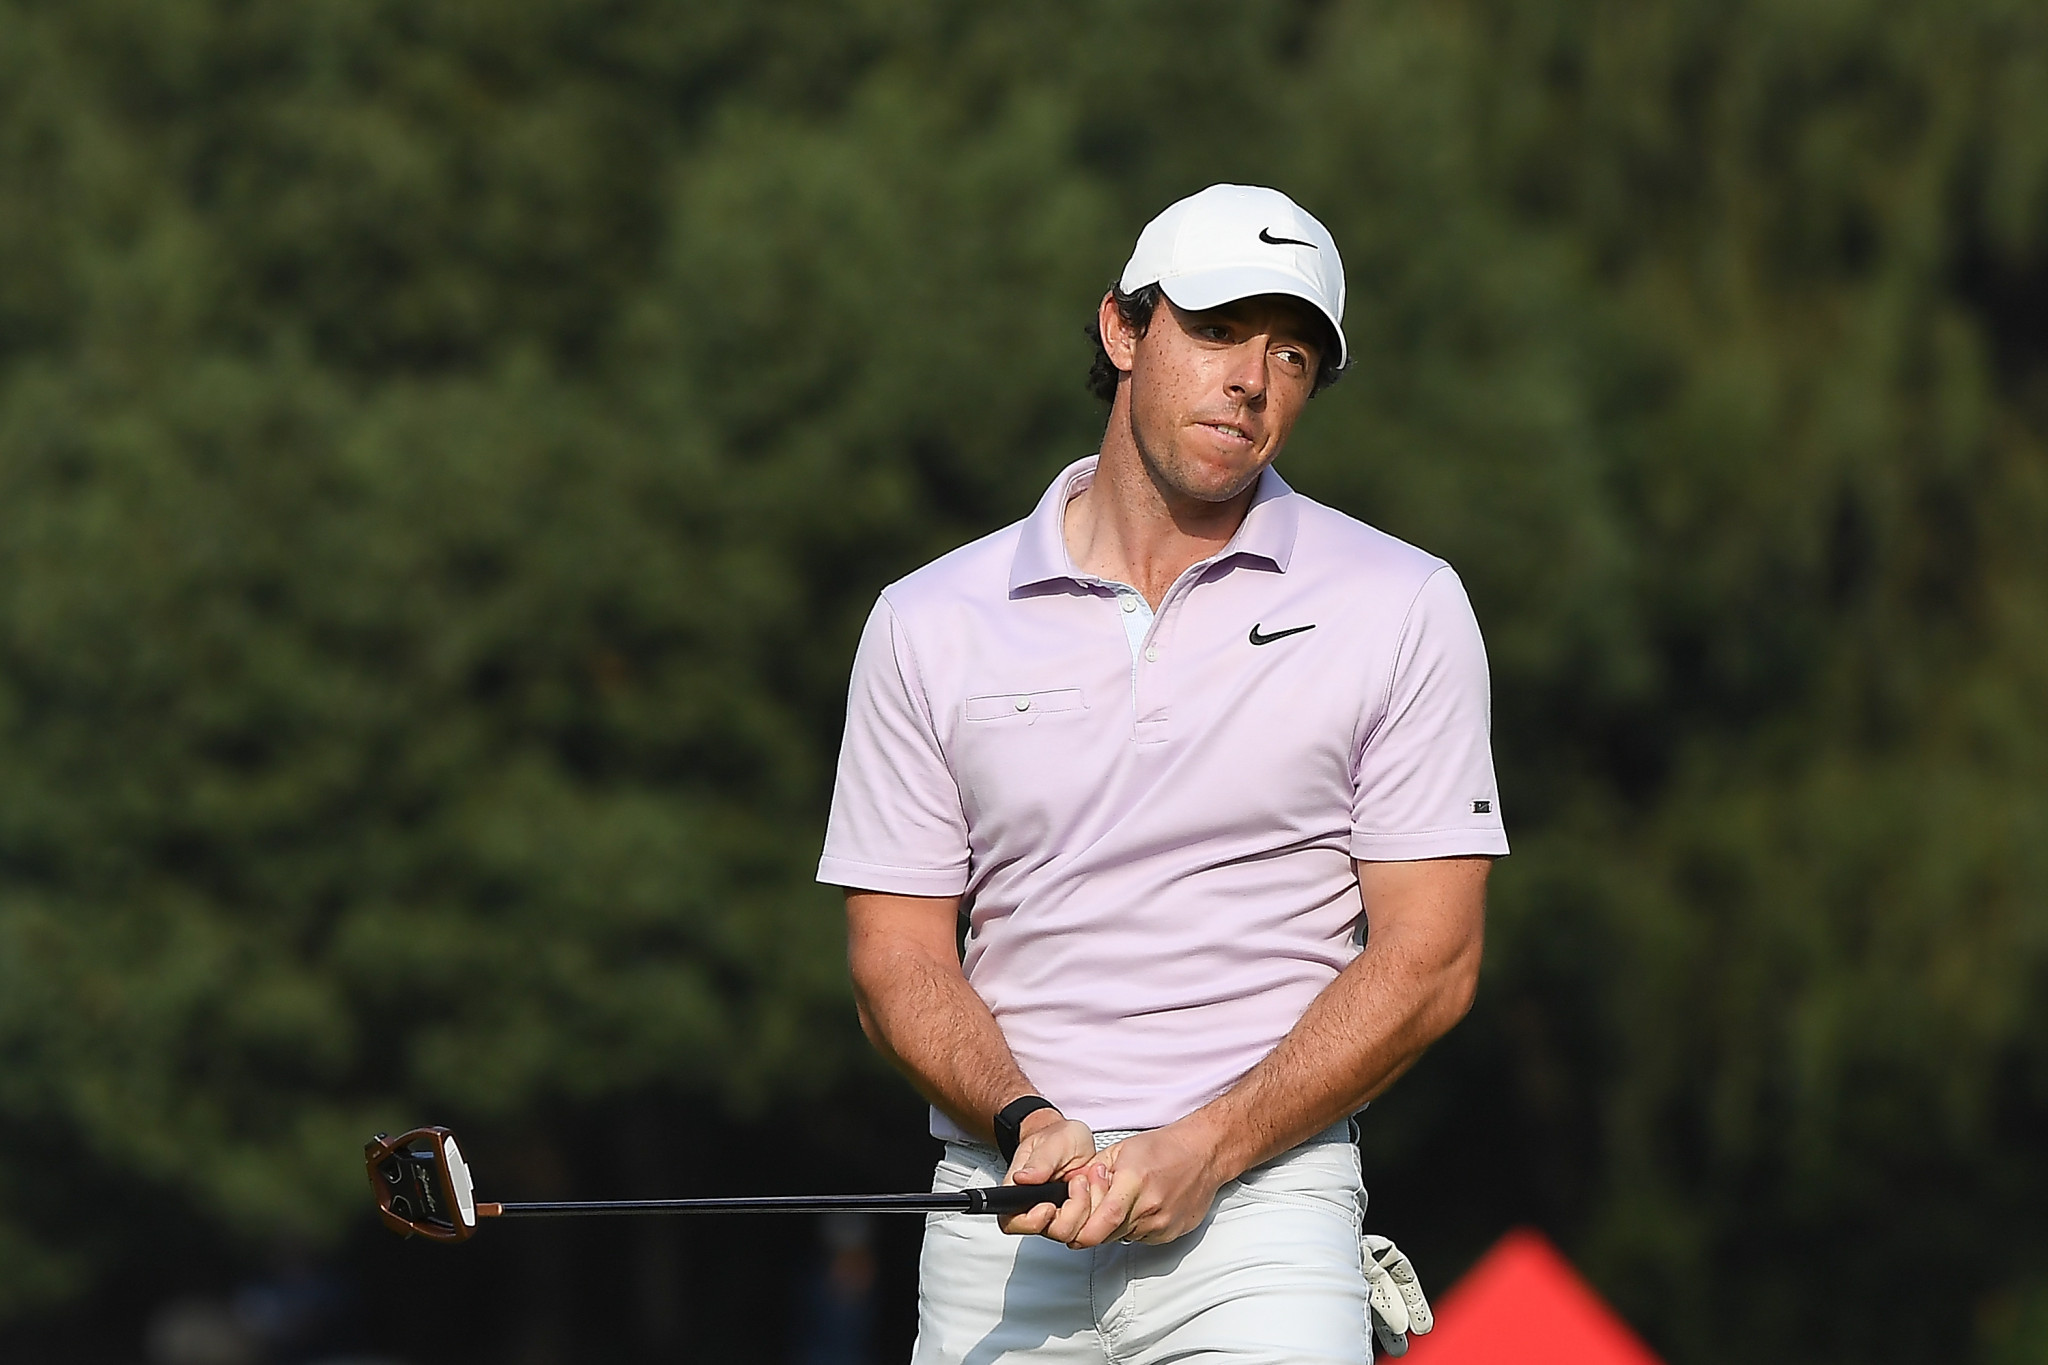 McIlroy takes one-shot lead into final round at WGC-HSBC Champions